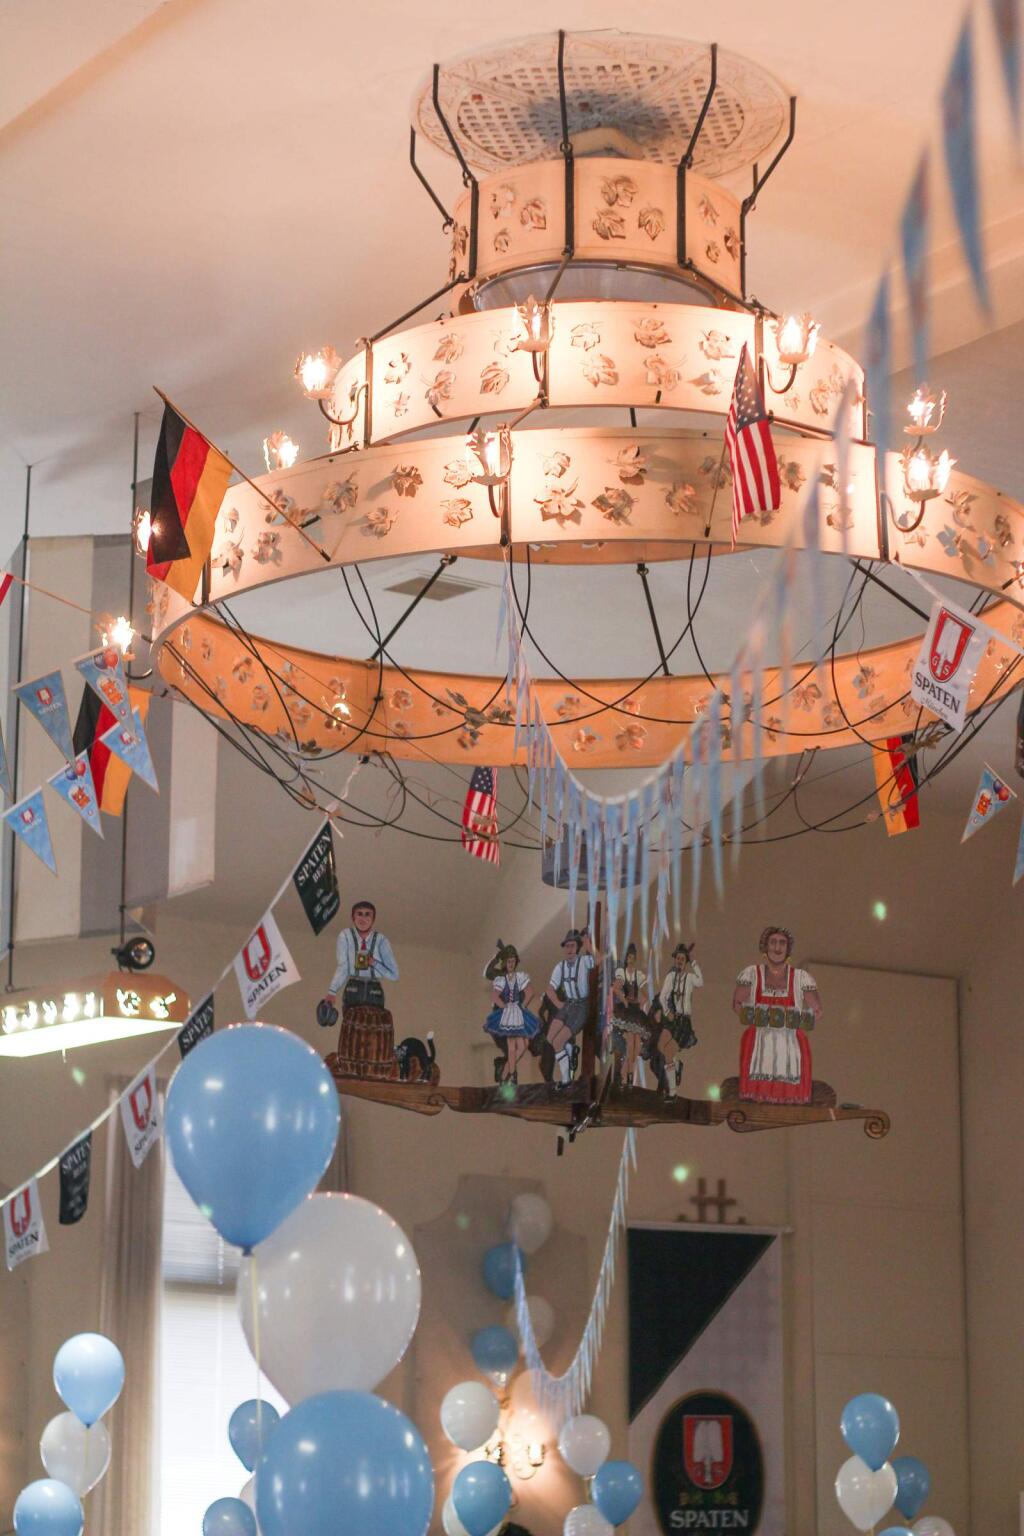 Hermann Sons Hall is decked out for Oktoberfest on Sunday, October 11, 2015. (ASHLEY COLLINGWOOD/FOR THE ARGUS-COURIER)